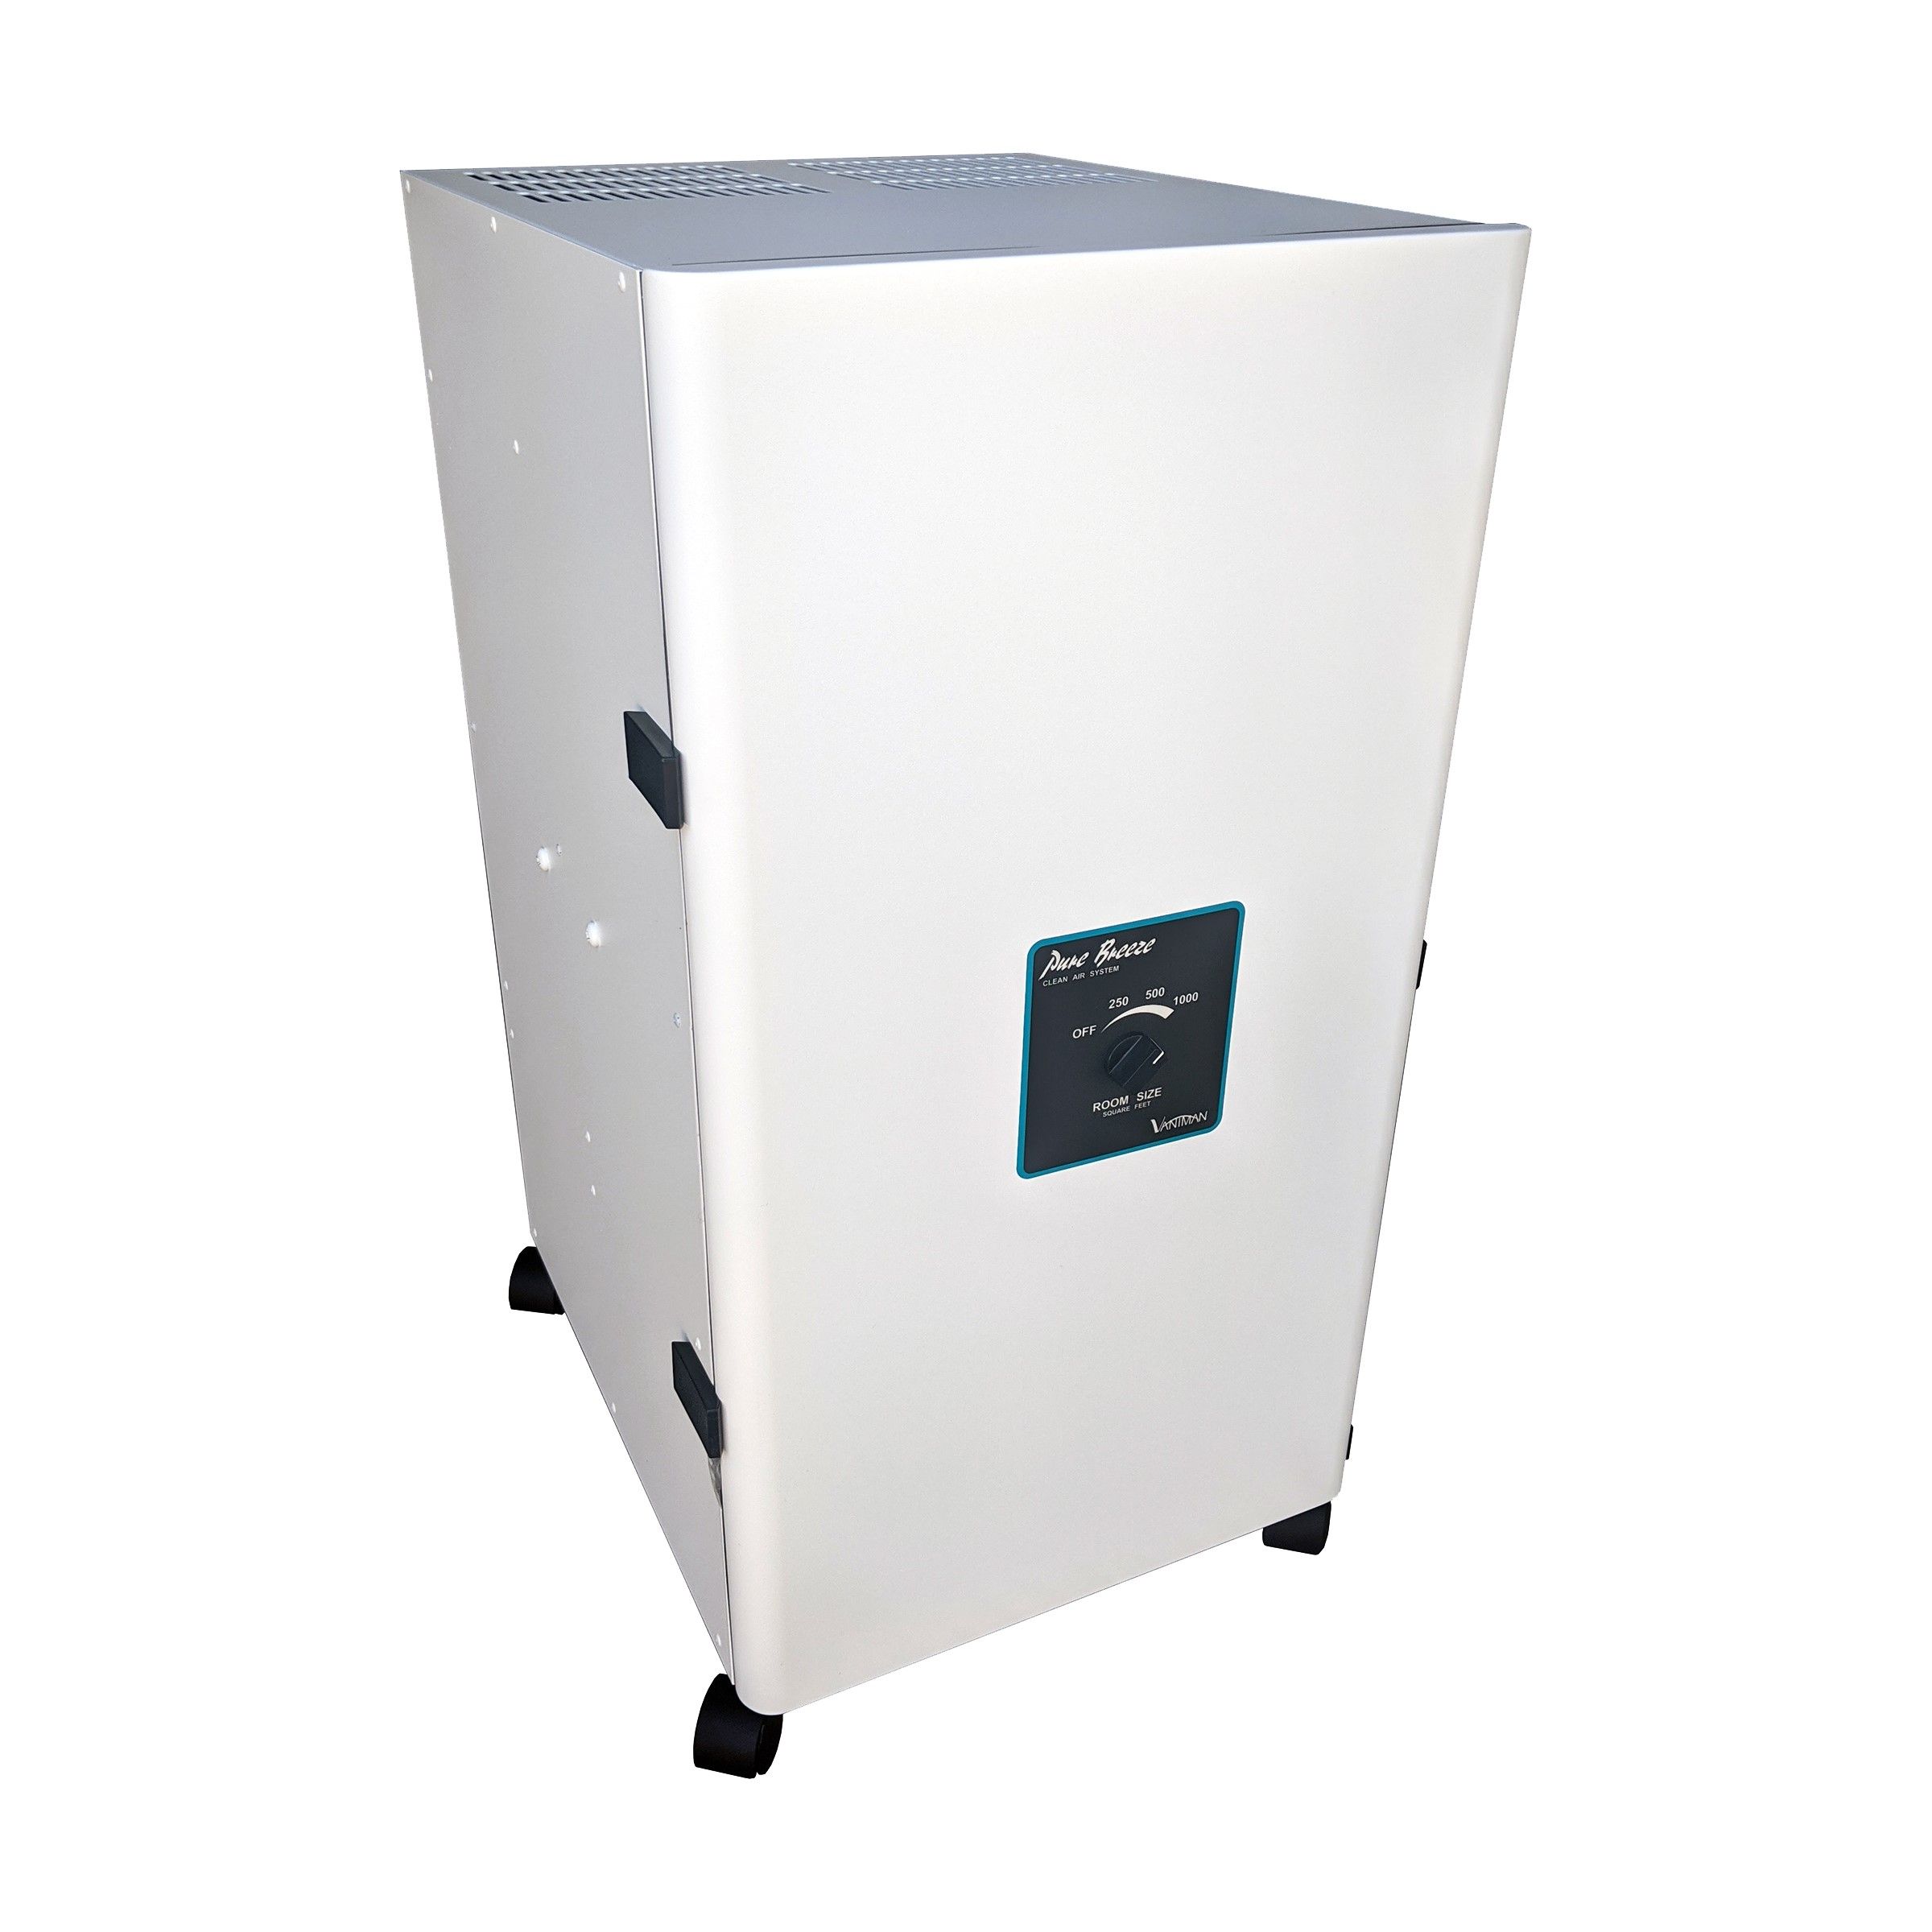 Pure Breeze HEPA Air Purifier from Great Lakes Dental Technologies